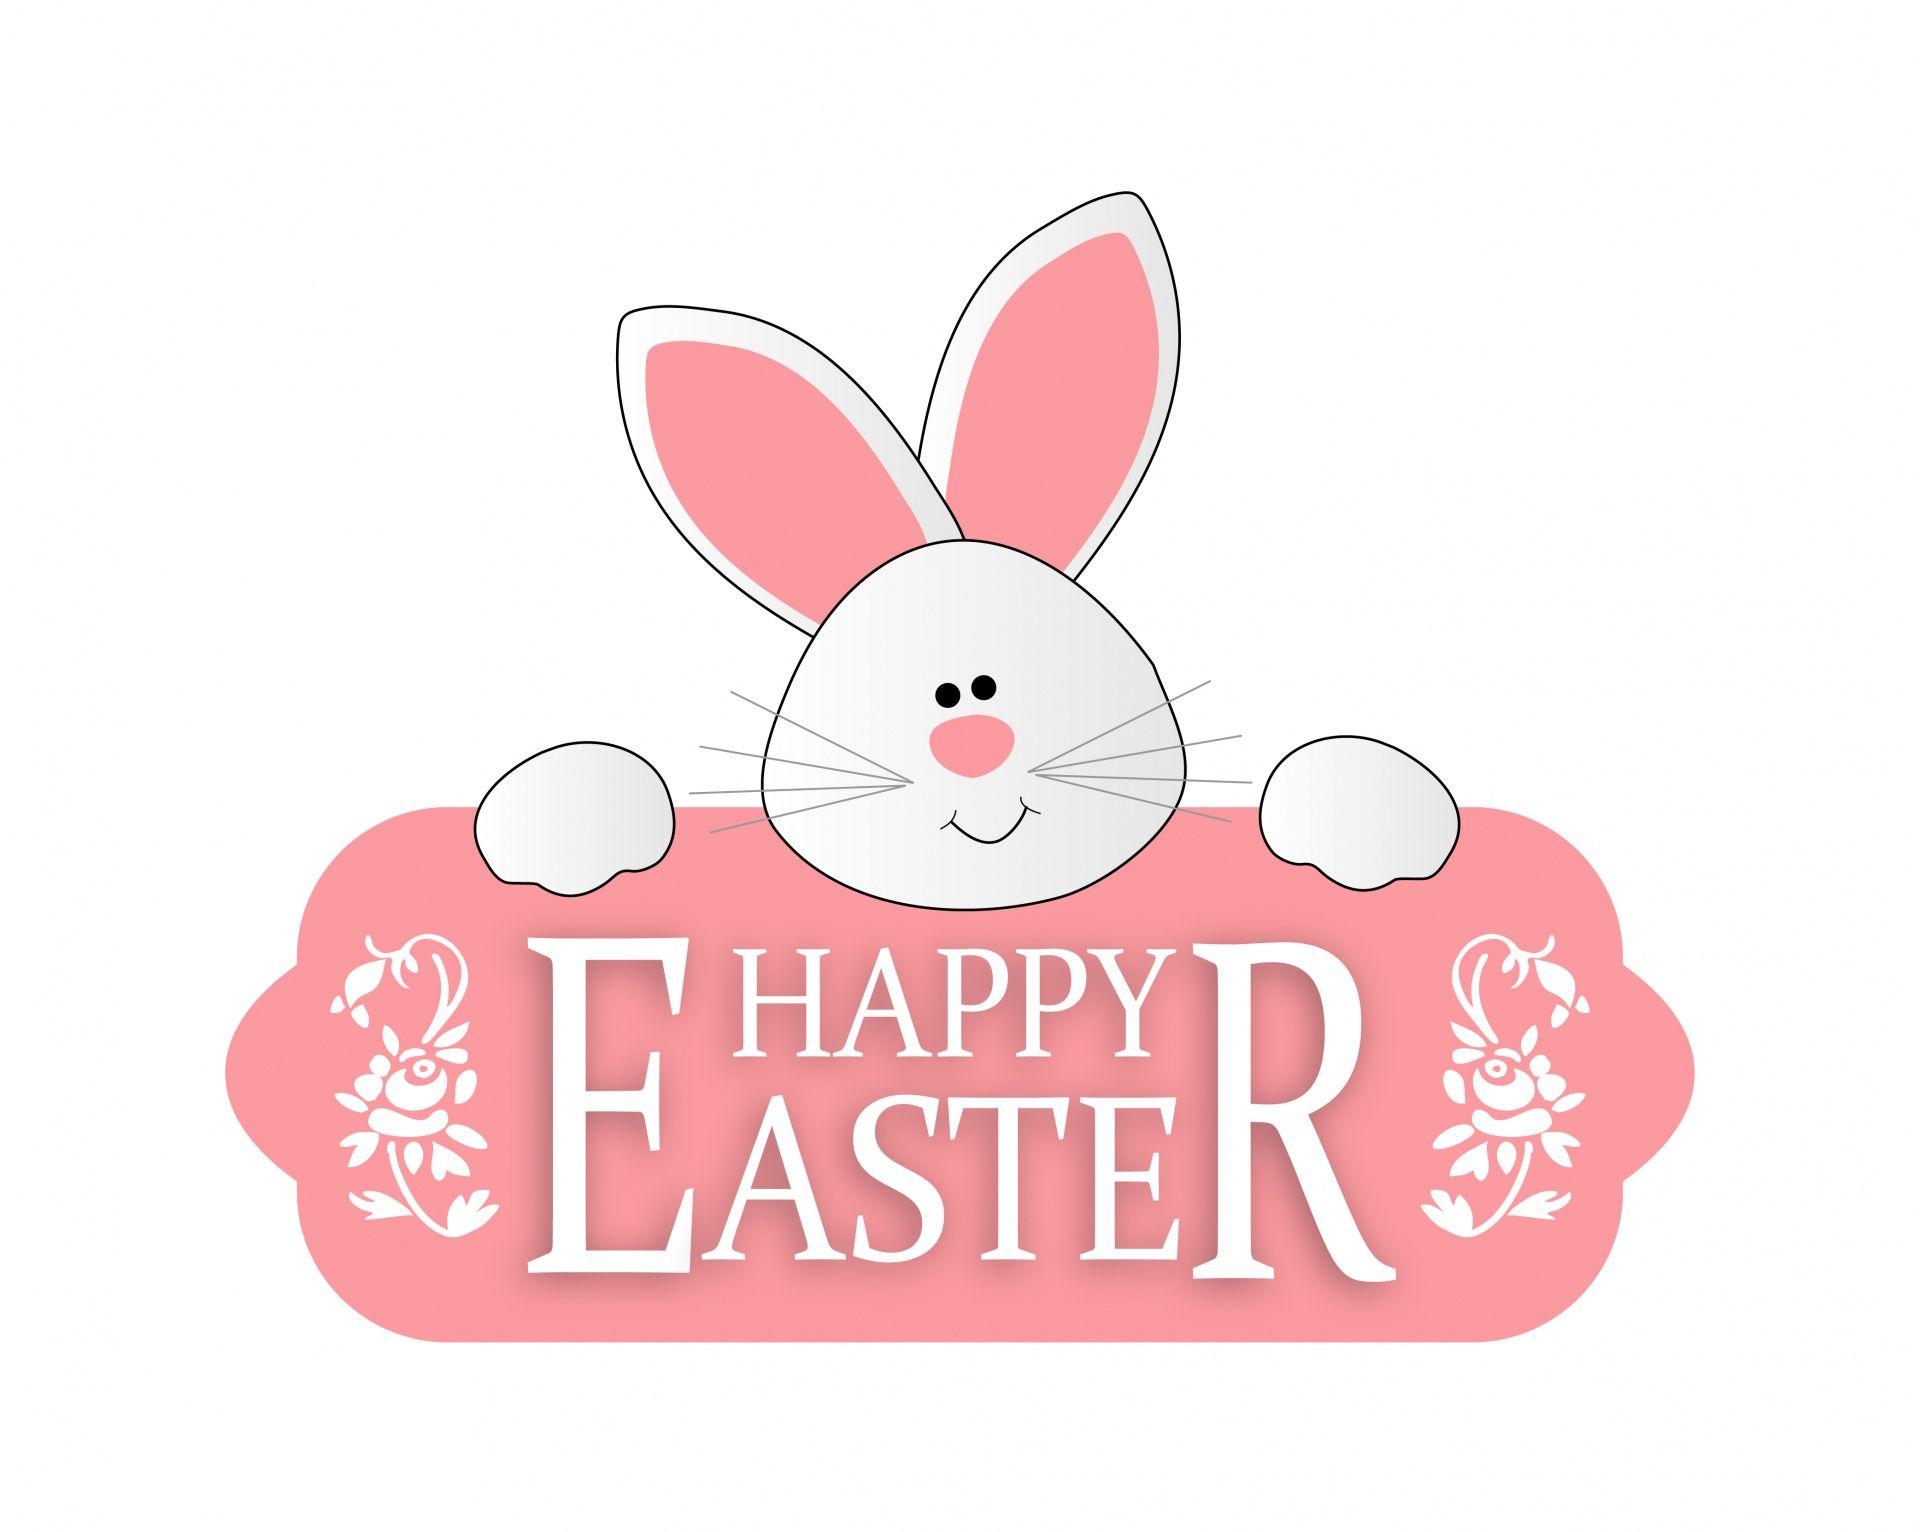 Easter Bunny Logo - The Easter Bunny is coming to Brymor!